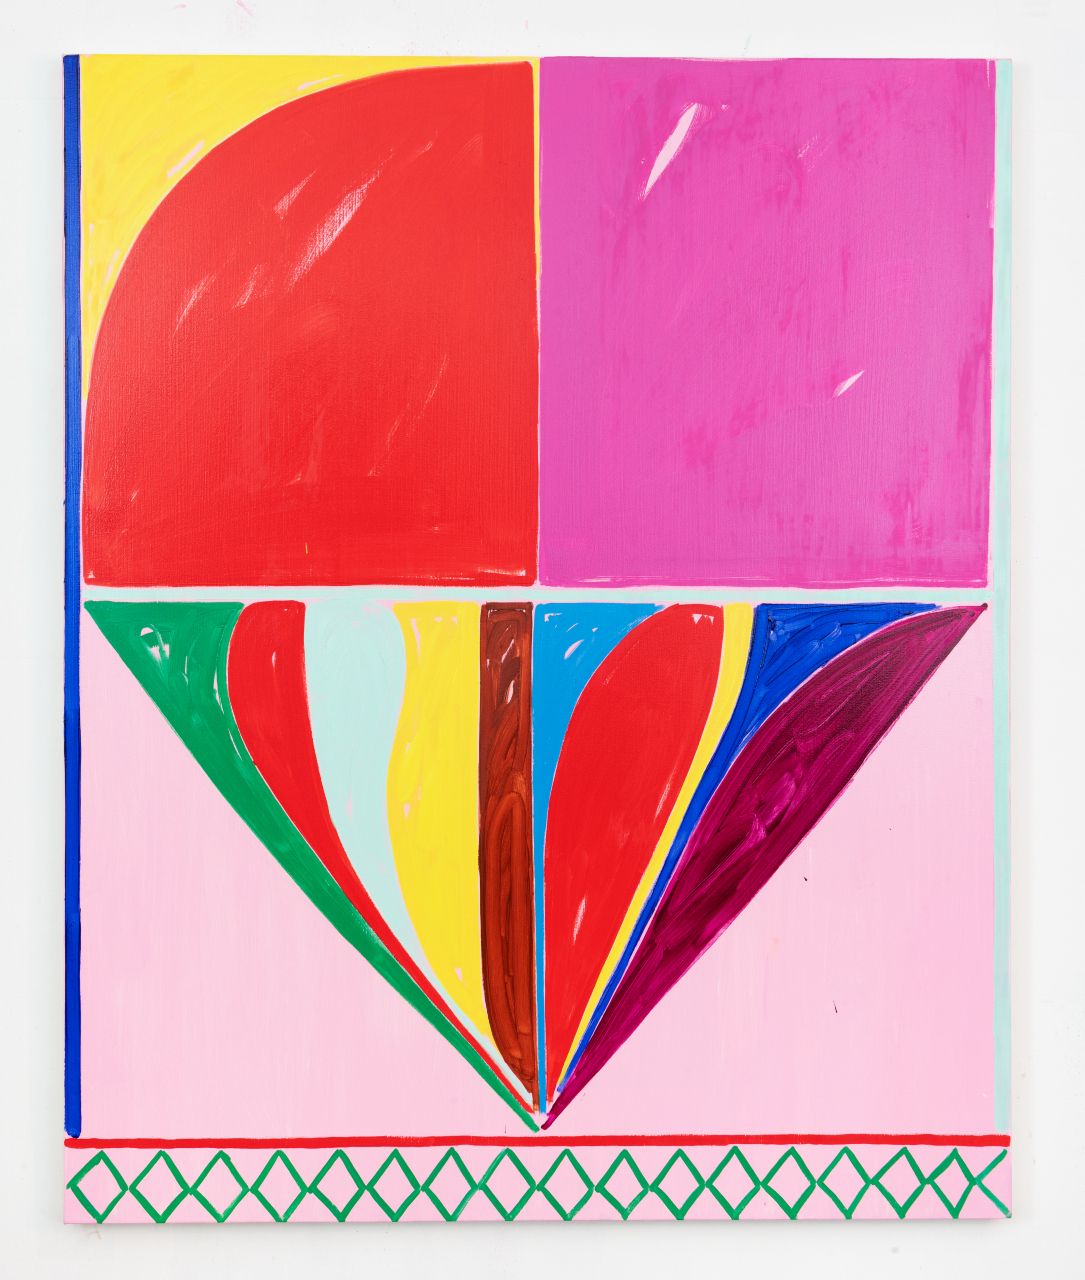 Reflection Pool (The Annunciation) 2022,  left side blue stripe vertical until touches red stripe horizontal, green diamond pattern below on pink background, upper yellow arch with red arc right darker pink rectangle, under green red blue yellow reds